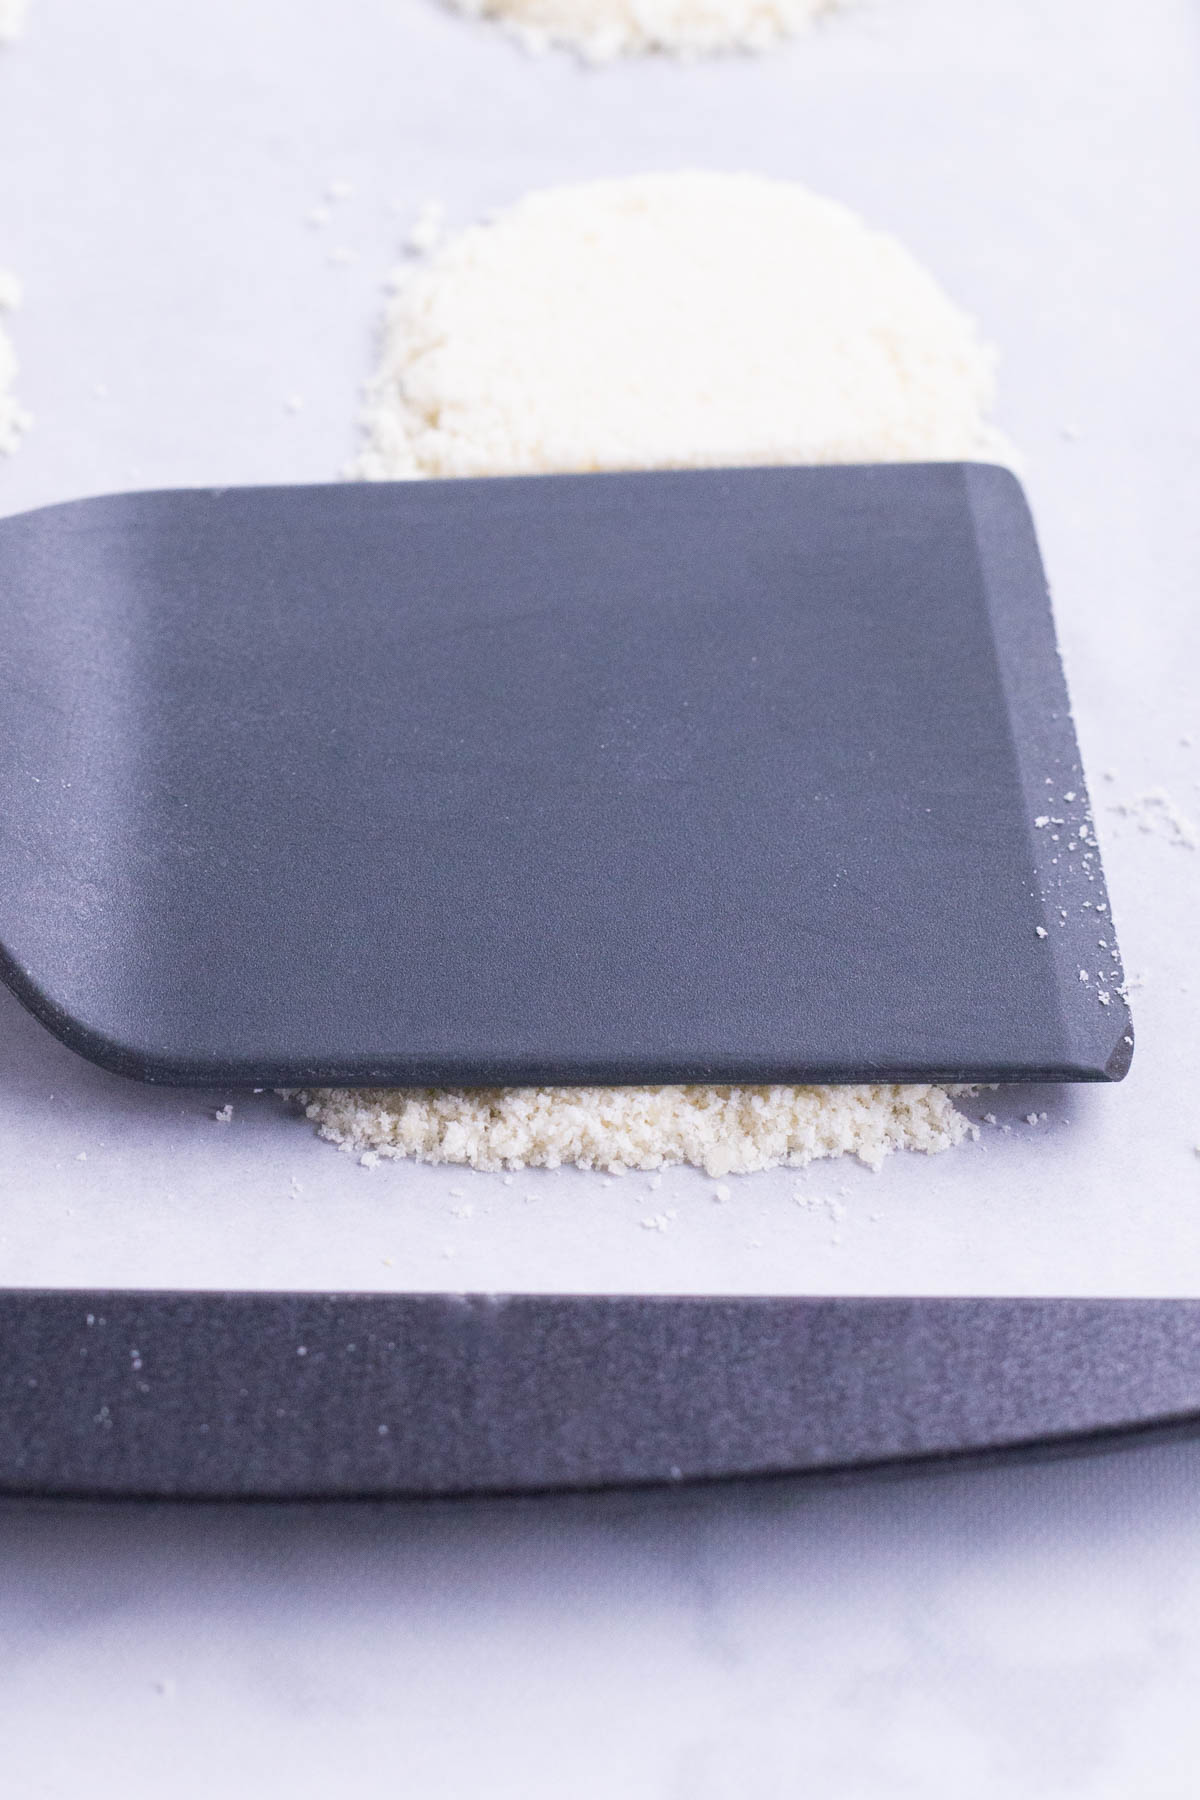 A spatula flattens Parmesan cheese in a baking tray.